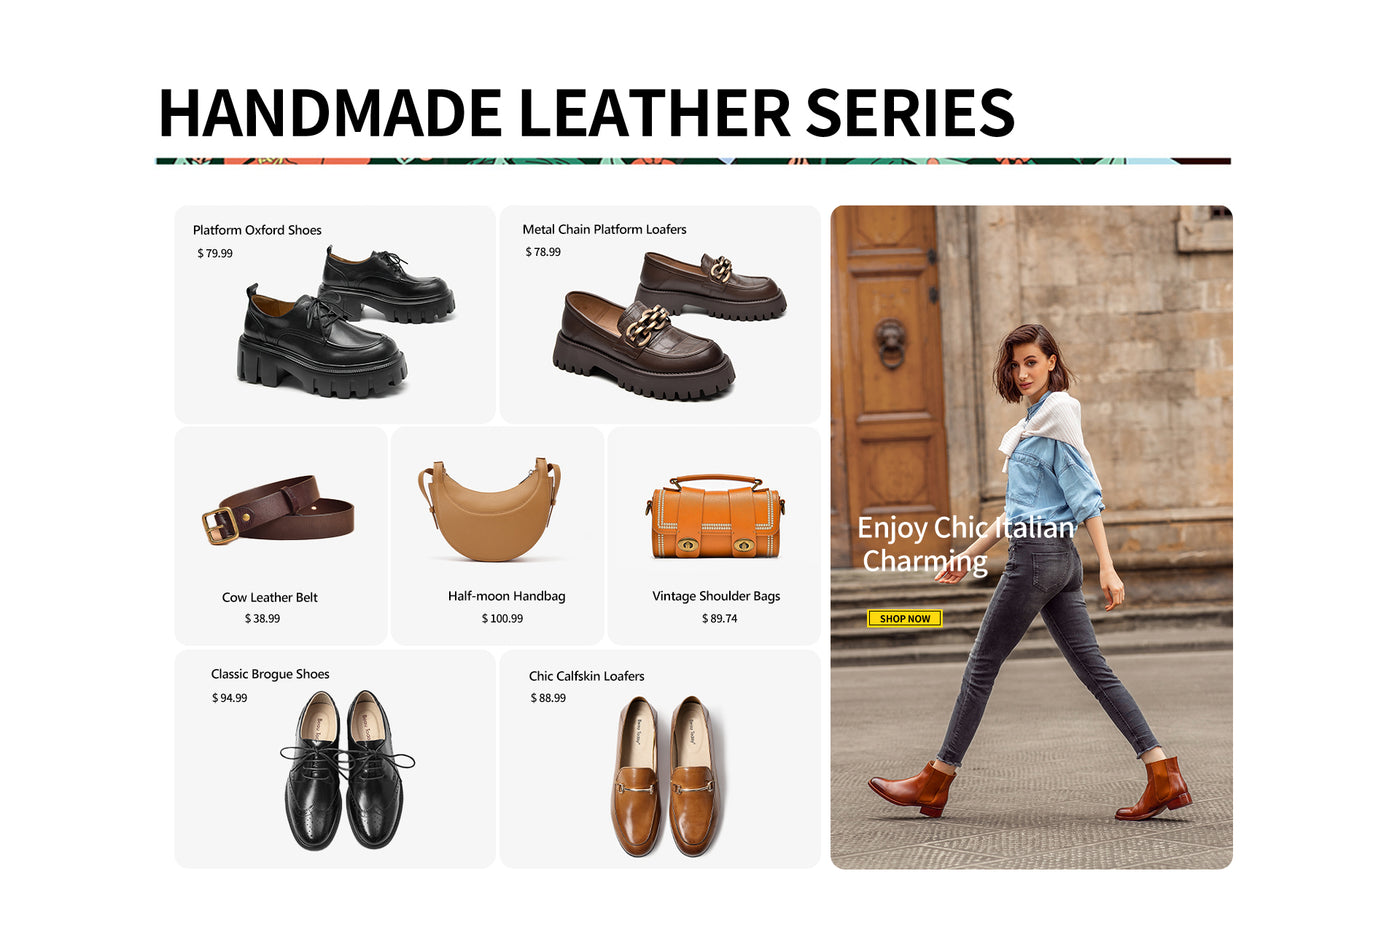 Find our handmade leather items, including leather oxford sheos & leather belt & leather handbags